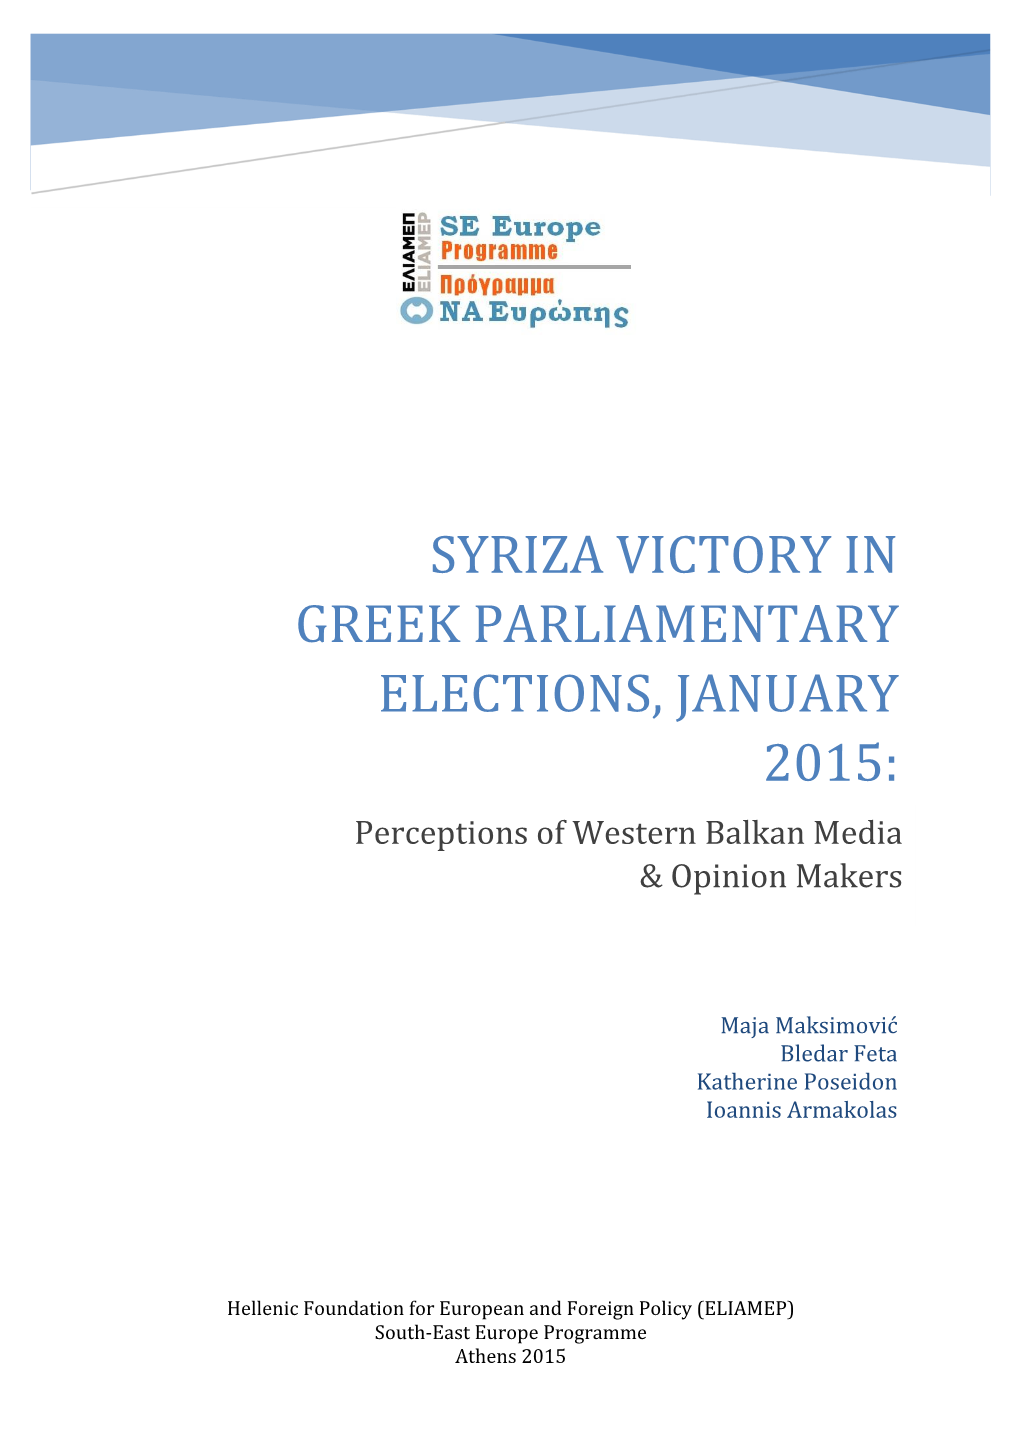 SYRIZA VICTORY in GREEK PARLIAMENTARY ELECTIONS, JANUARY 2015: Perceptions of Western Balkan Media & Opinion Makers